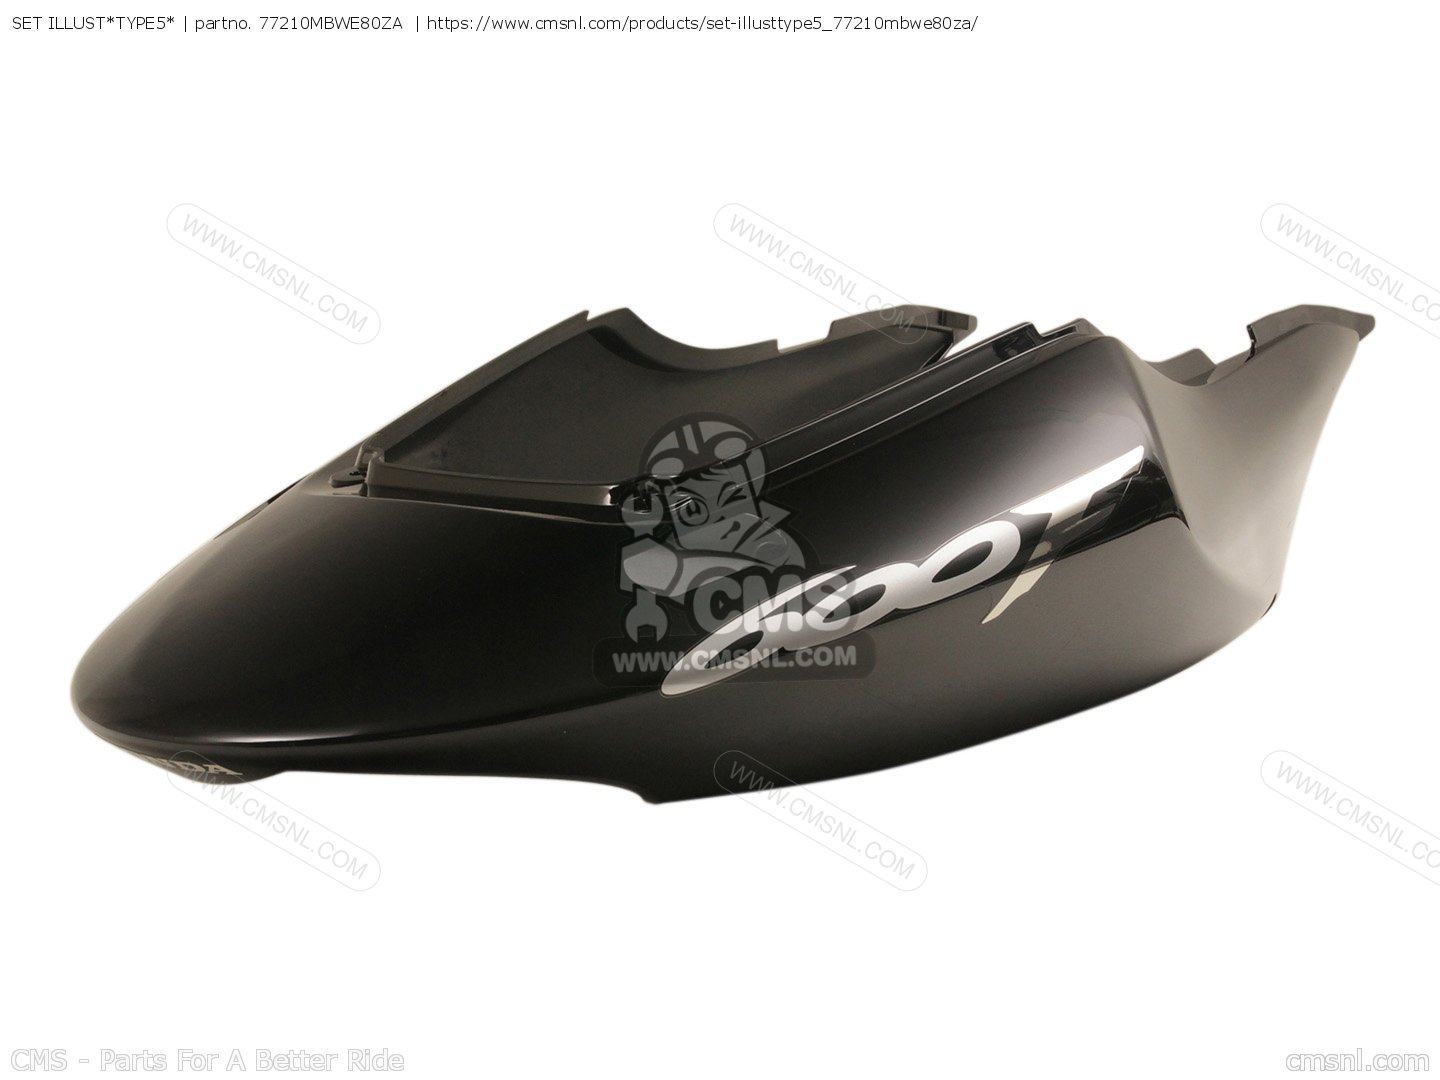 Image sample of the 2.3M Motorcycle Parts for 4 Brands: Part NO, Price, Model, Images database